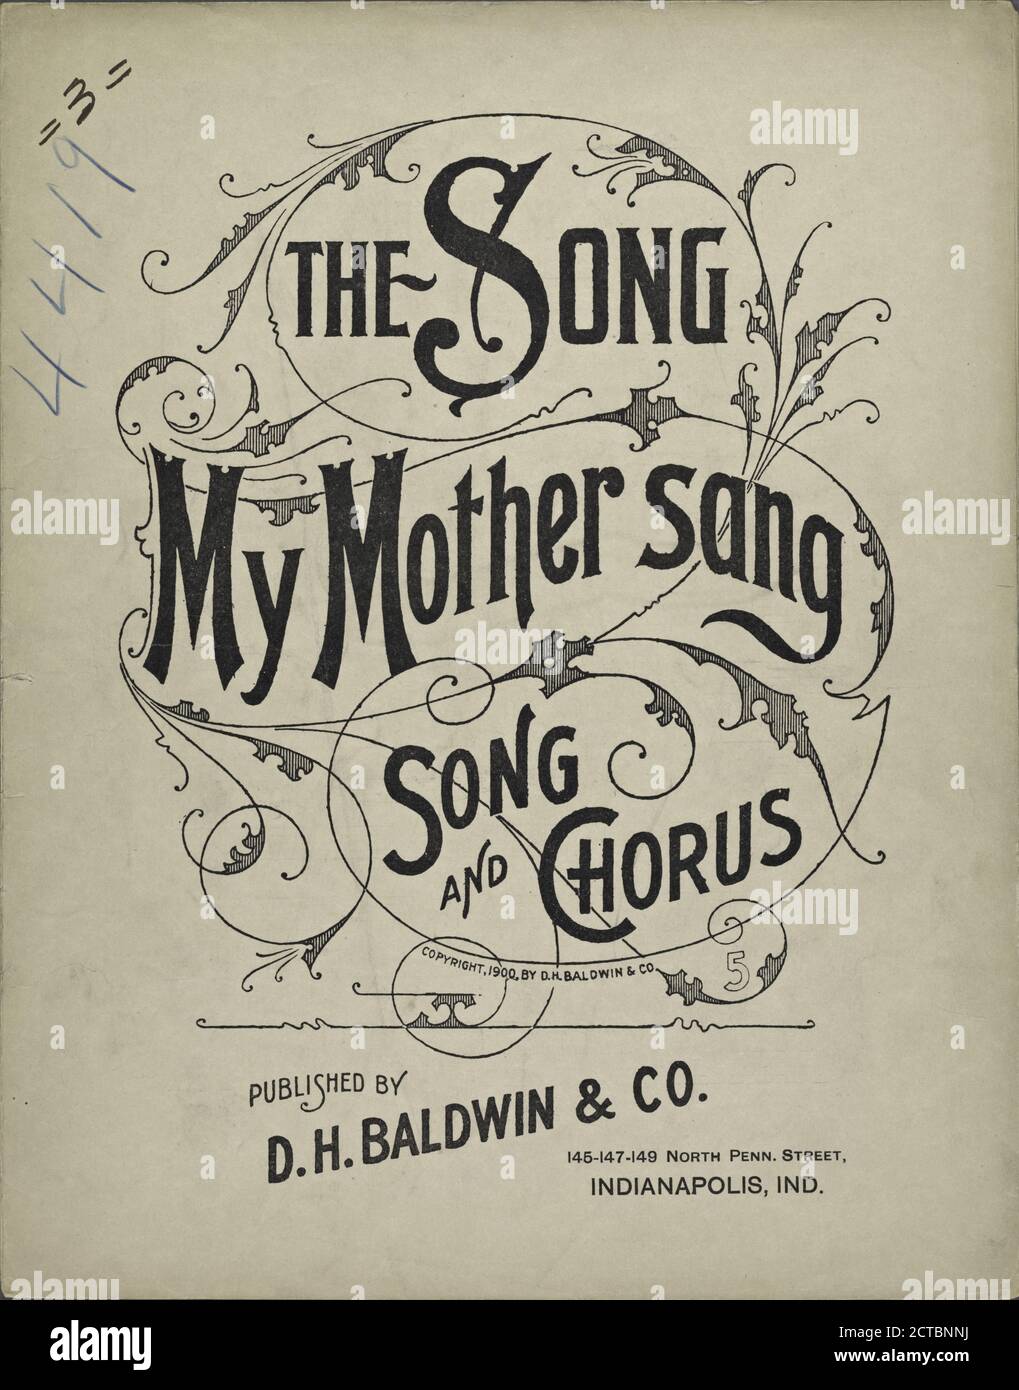 The song my mother sang, notated music, Scores, 1900 - 1900, Whyte, W. H., Whyte, W. H Stock Photo